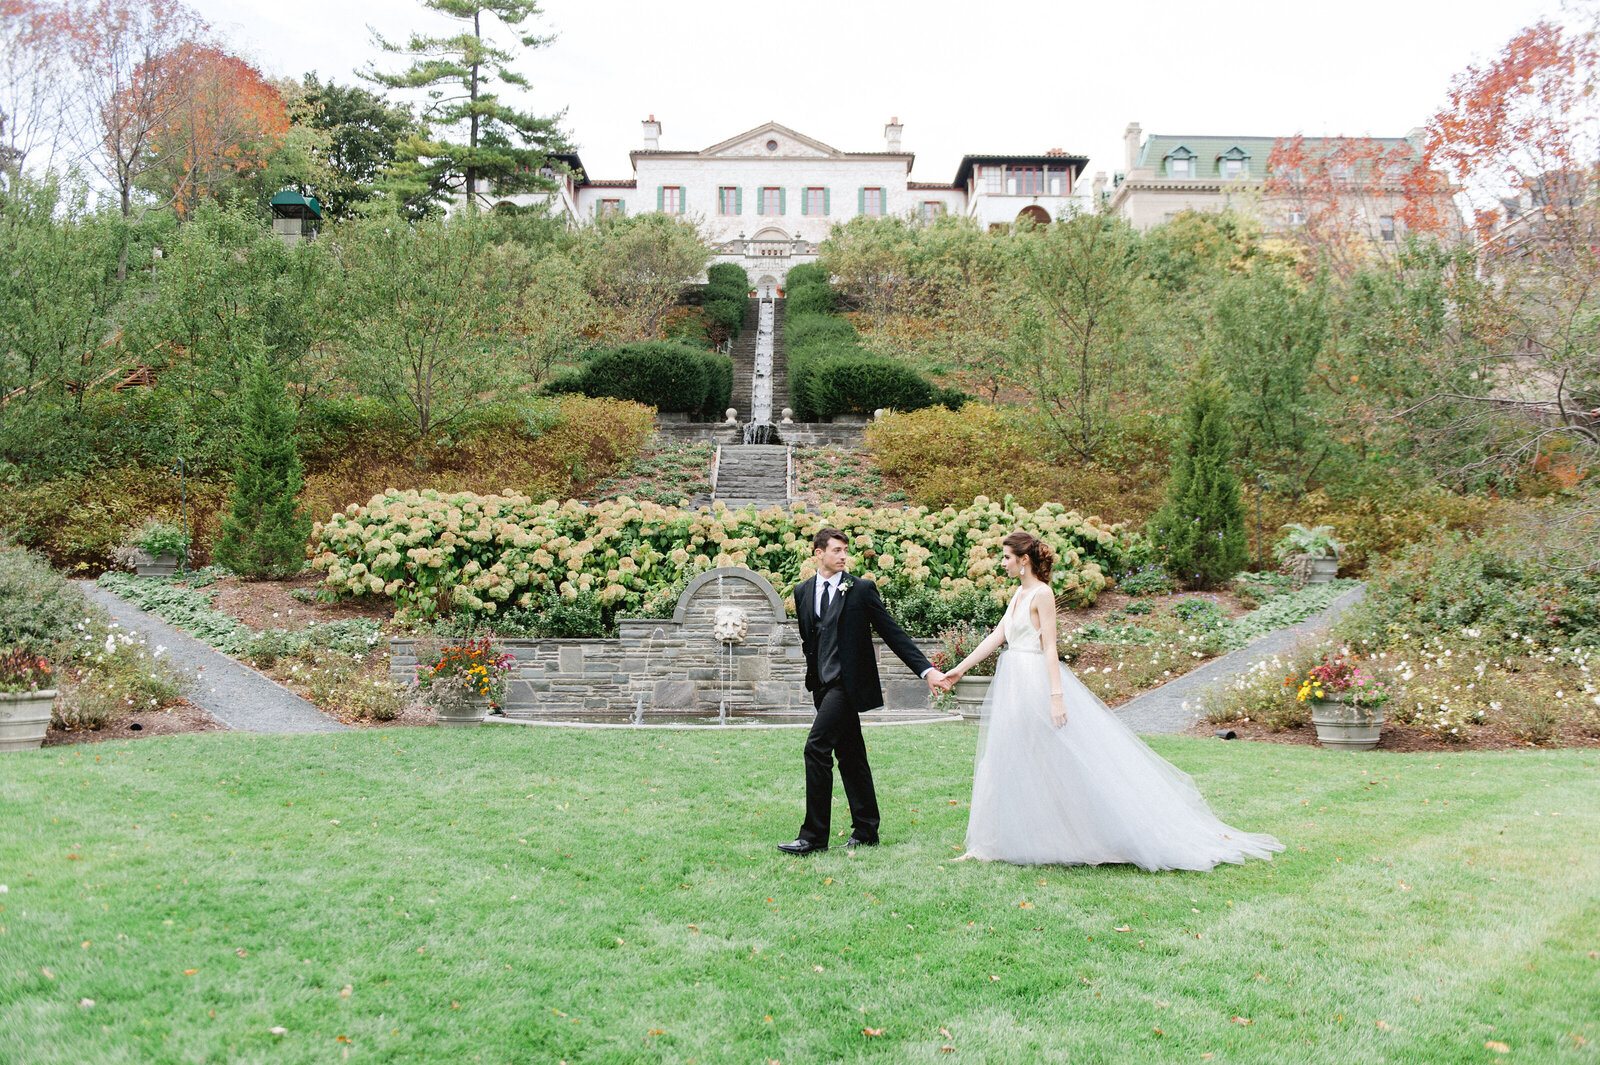 Villa Terrace Law Portraits of  Bride and Groom at Lakefront Estate Luxury Wedding